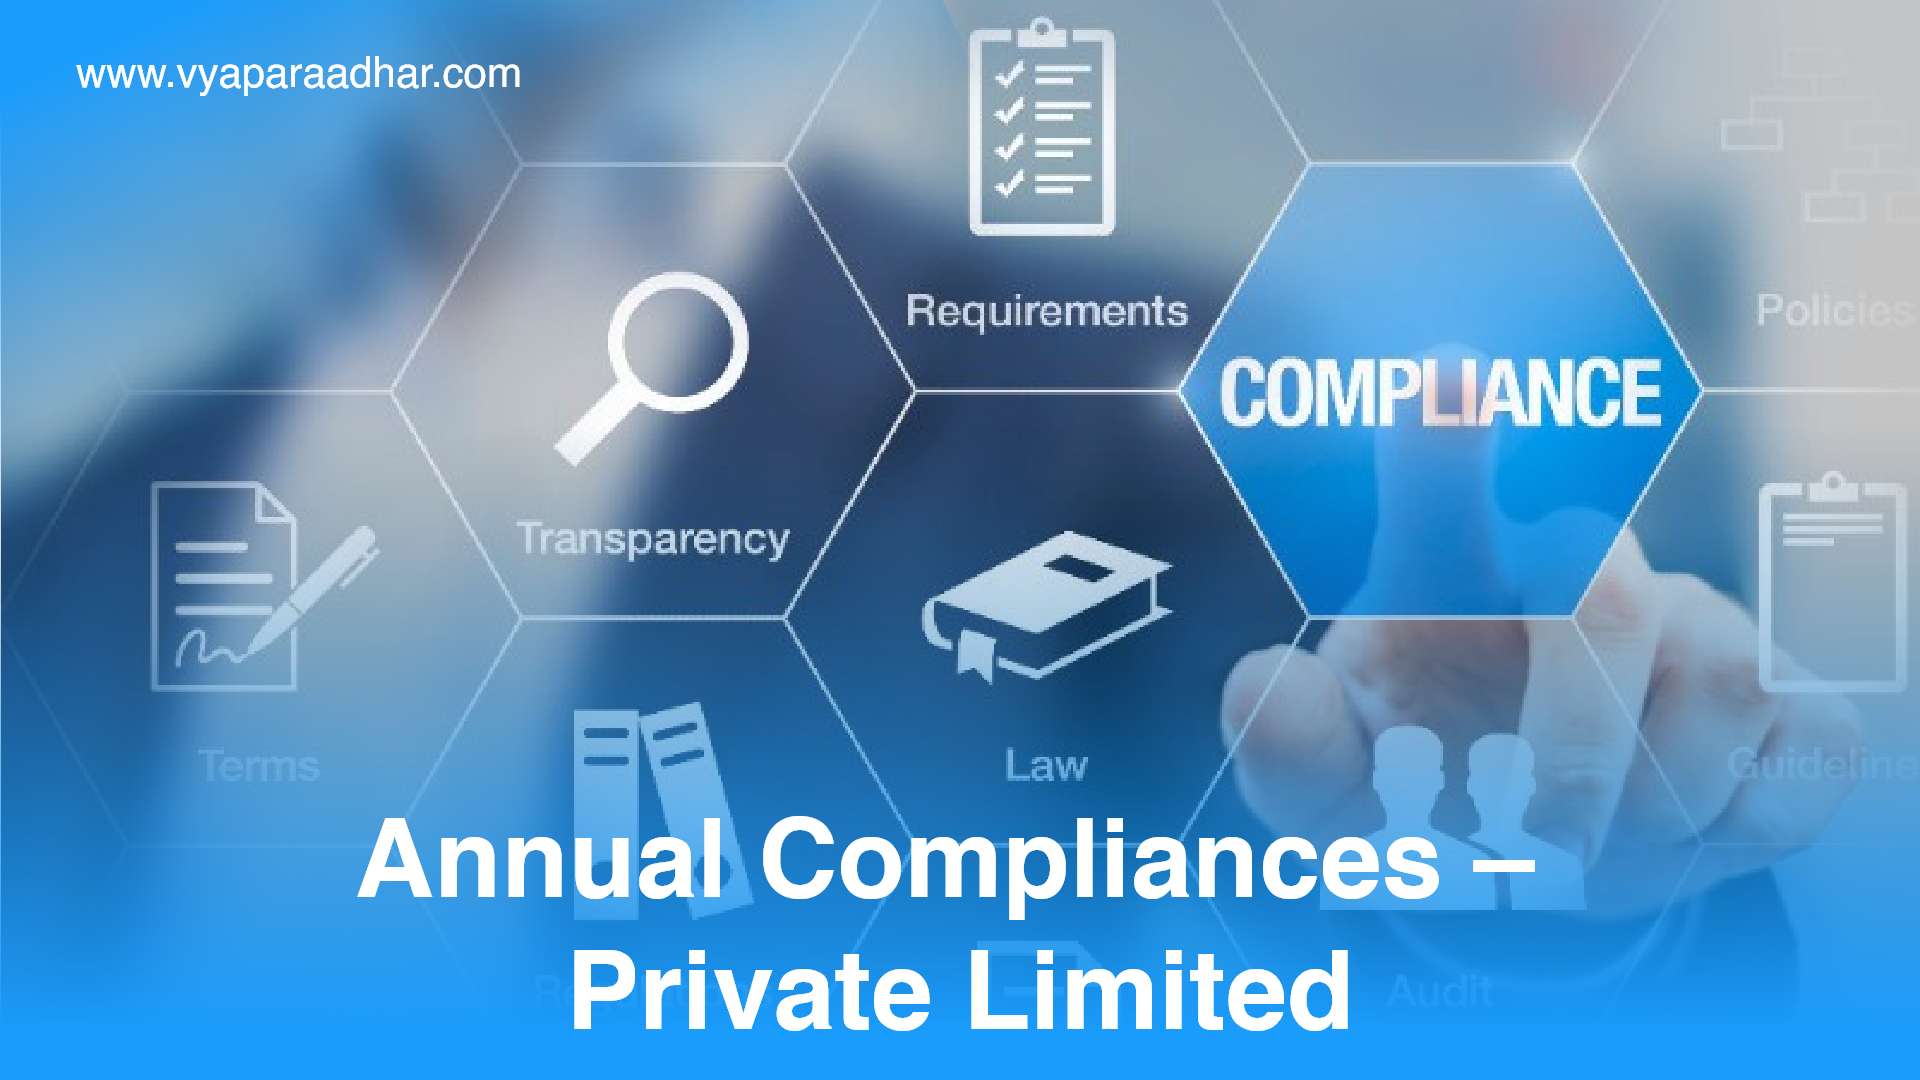 Annual Compliances – Private Limited